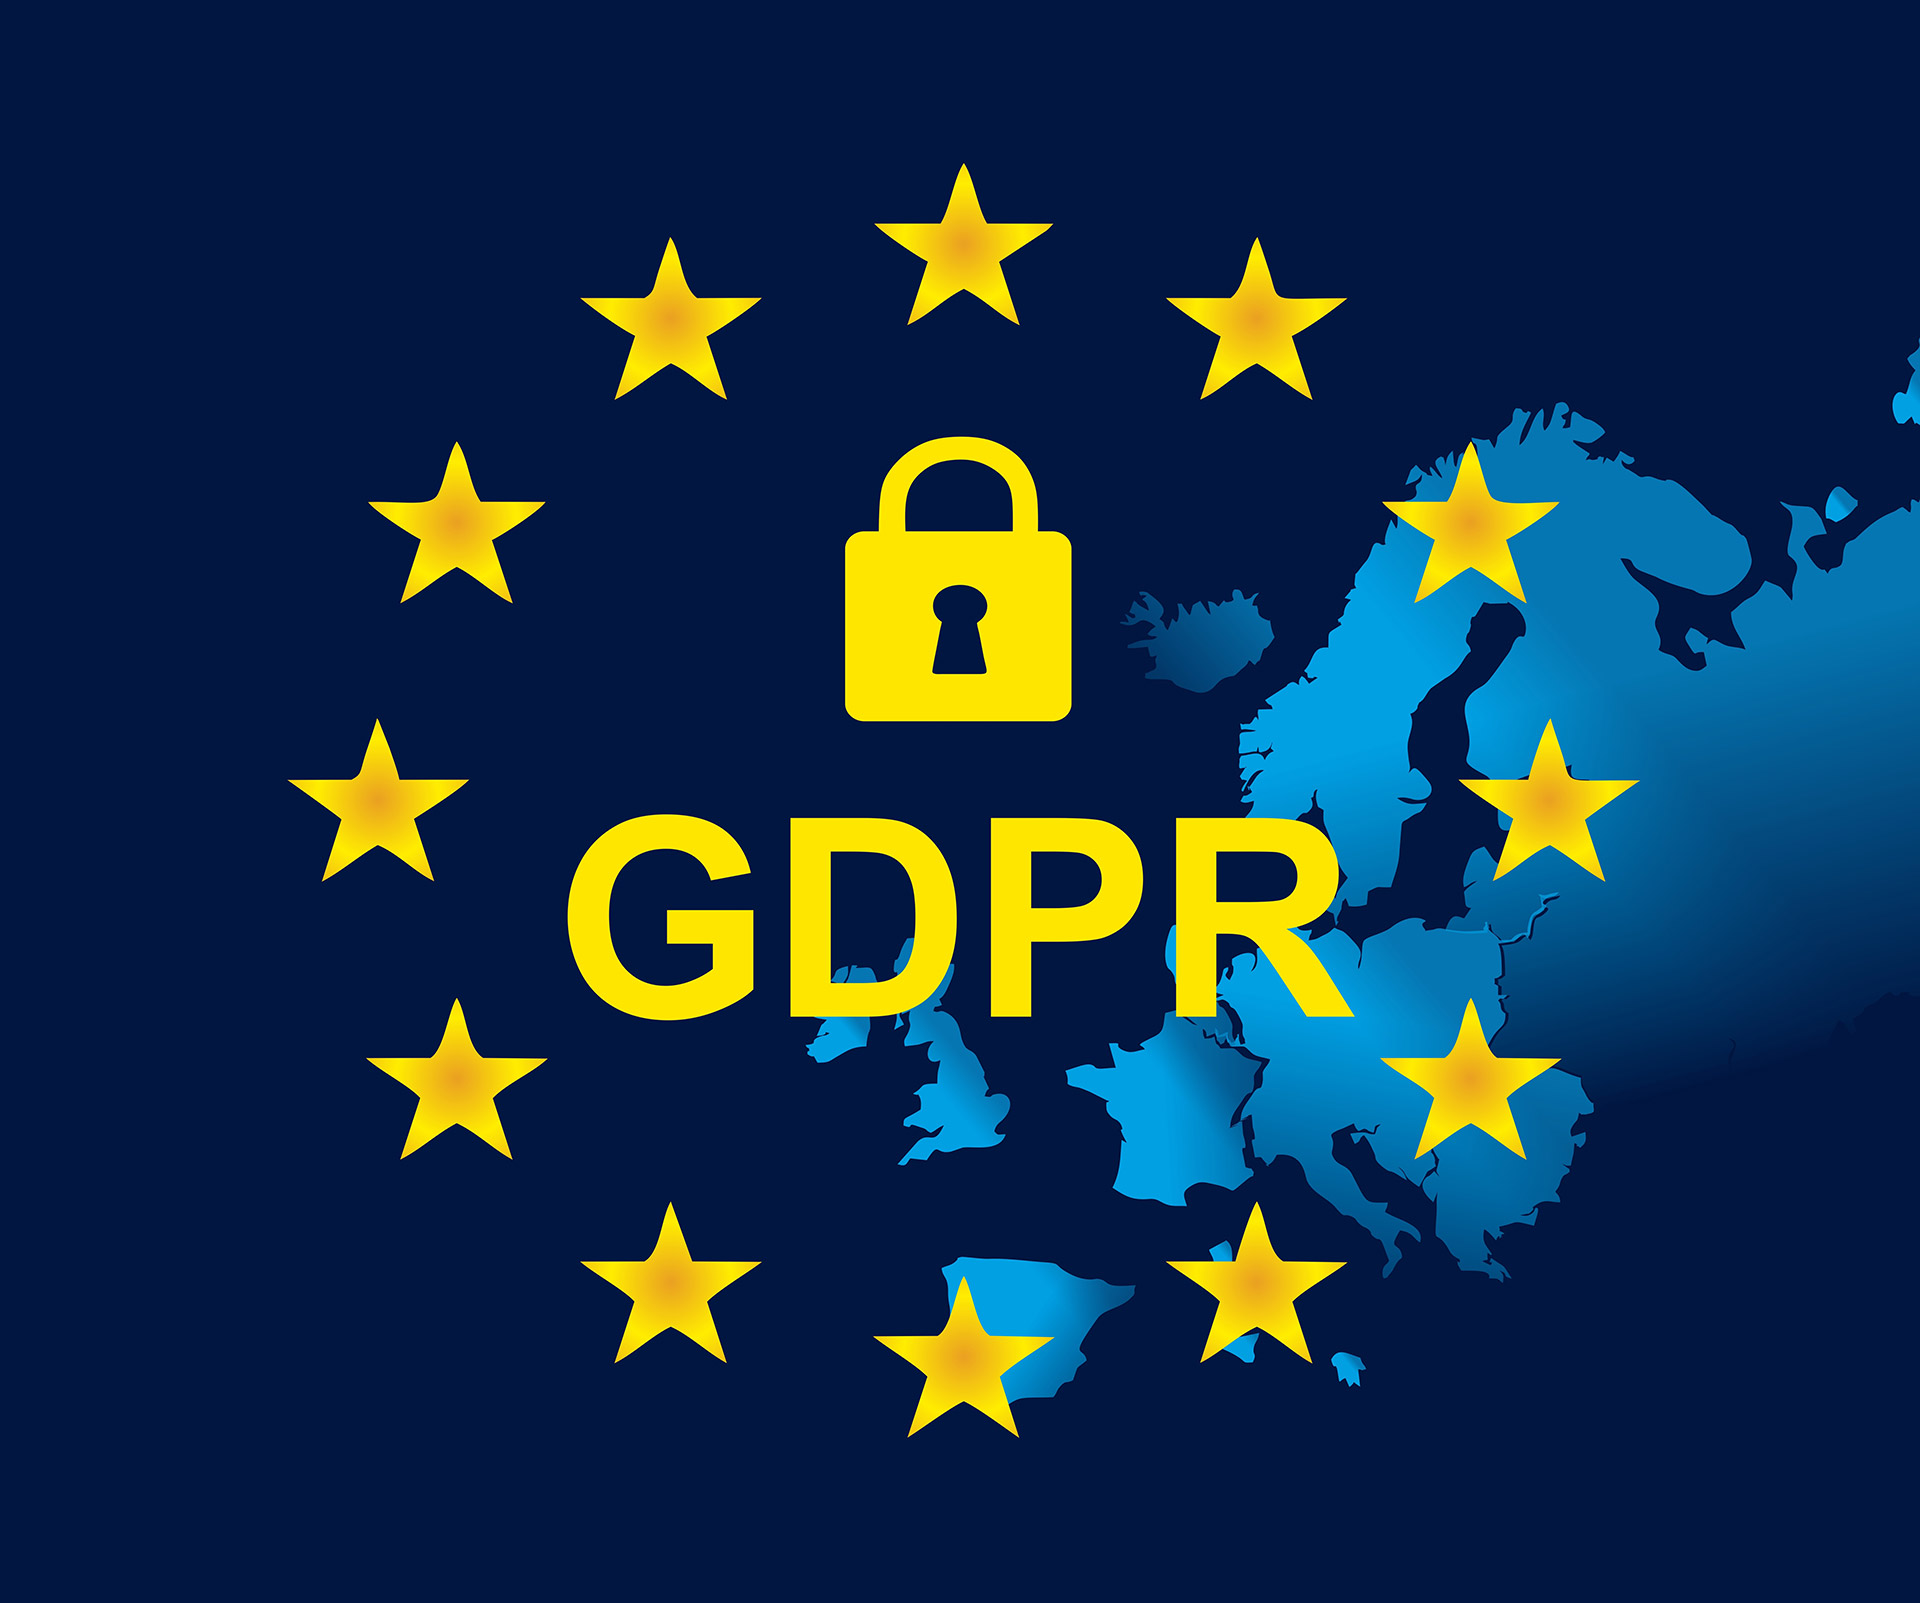 Legal Bases for Processing Personal Data Under GDPR